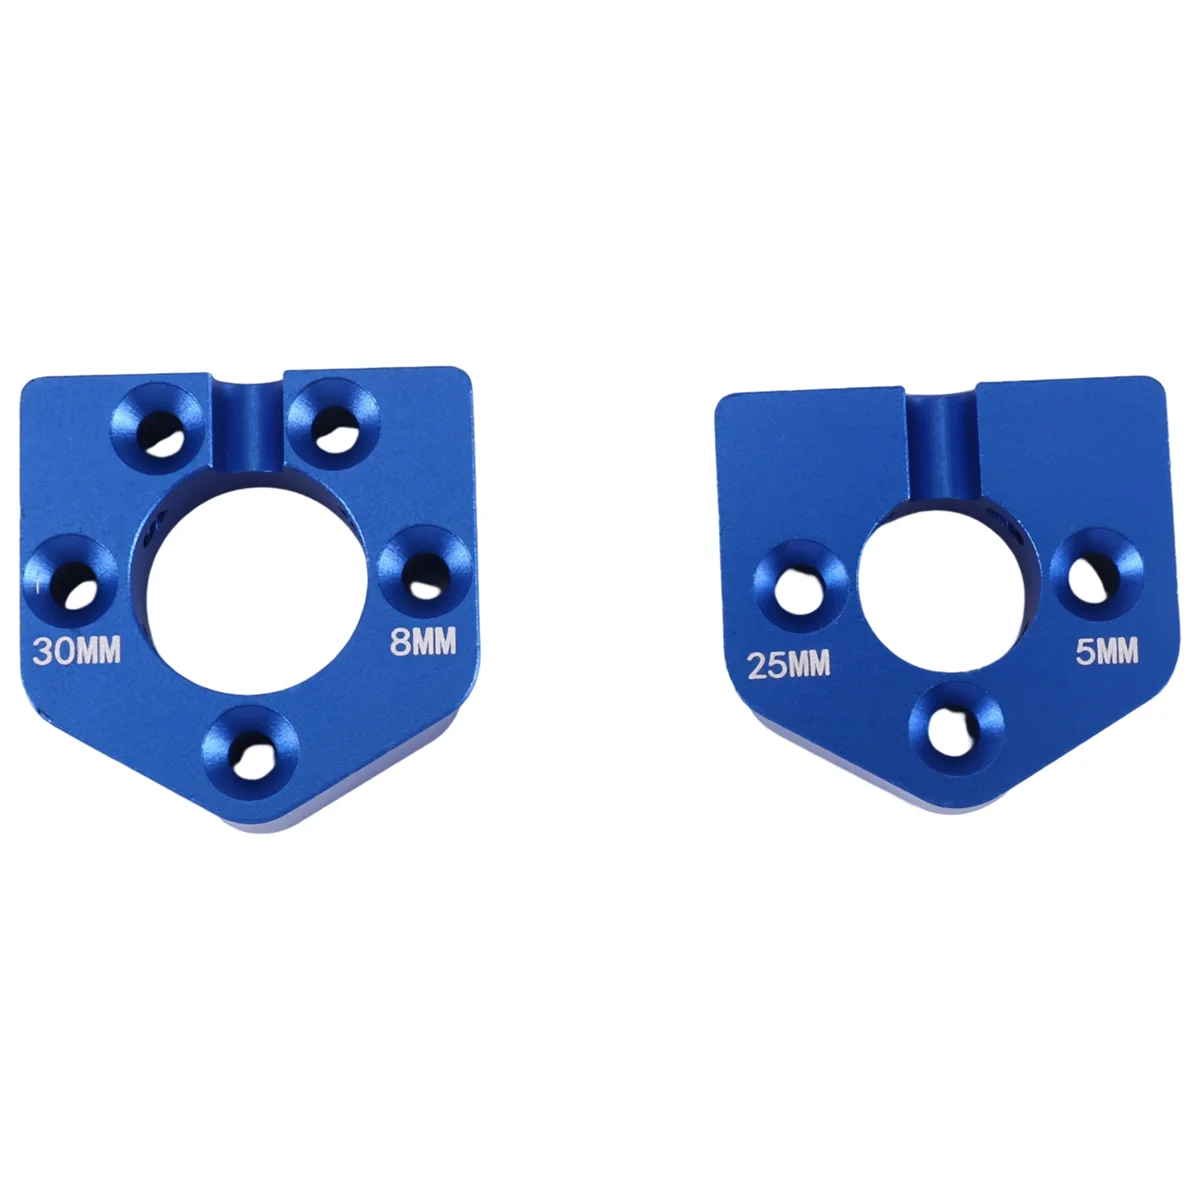 

Metal Upgraded Motor Mount Seat Quick Disassembly for TRAXXAS 1/5 X-Maxx XMAXX 6S 8S 1/6 XRT RC Car Upgrade Parts,2